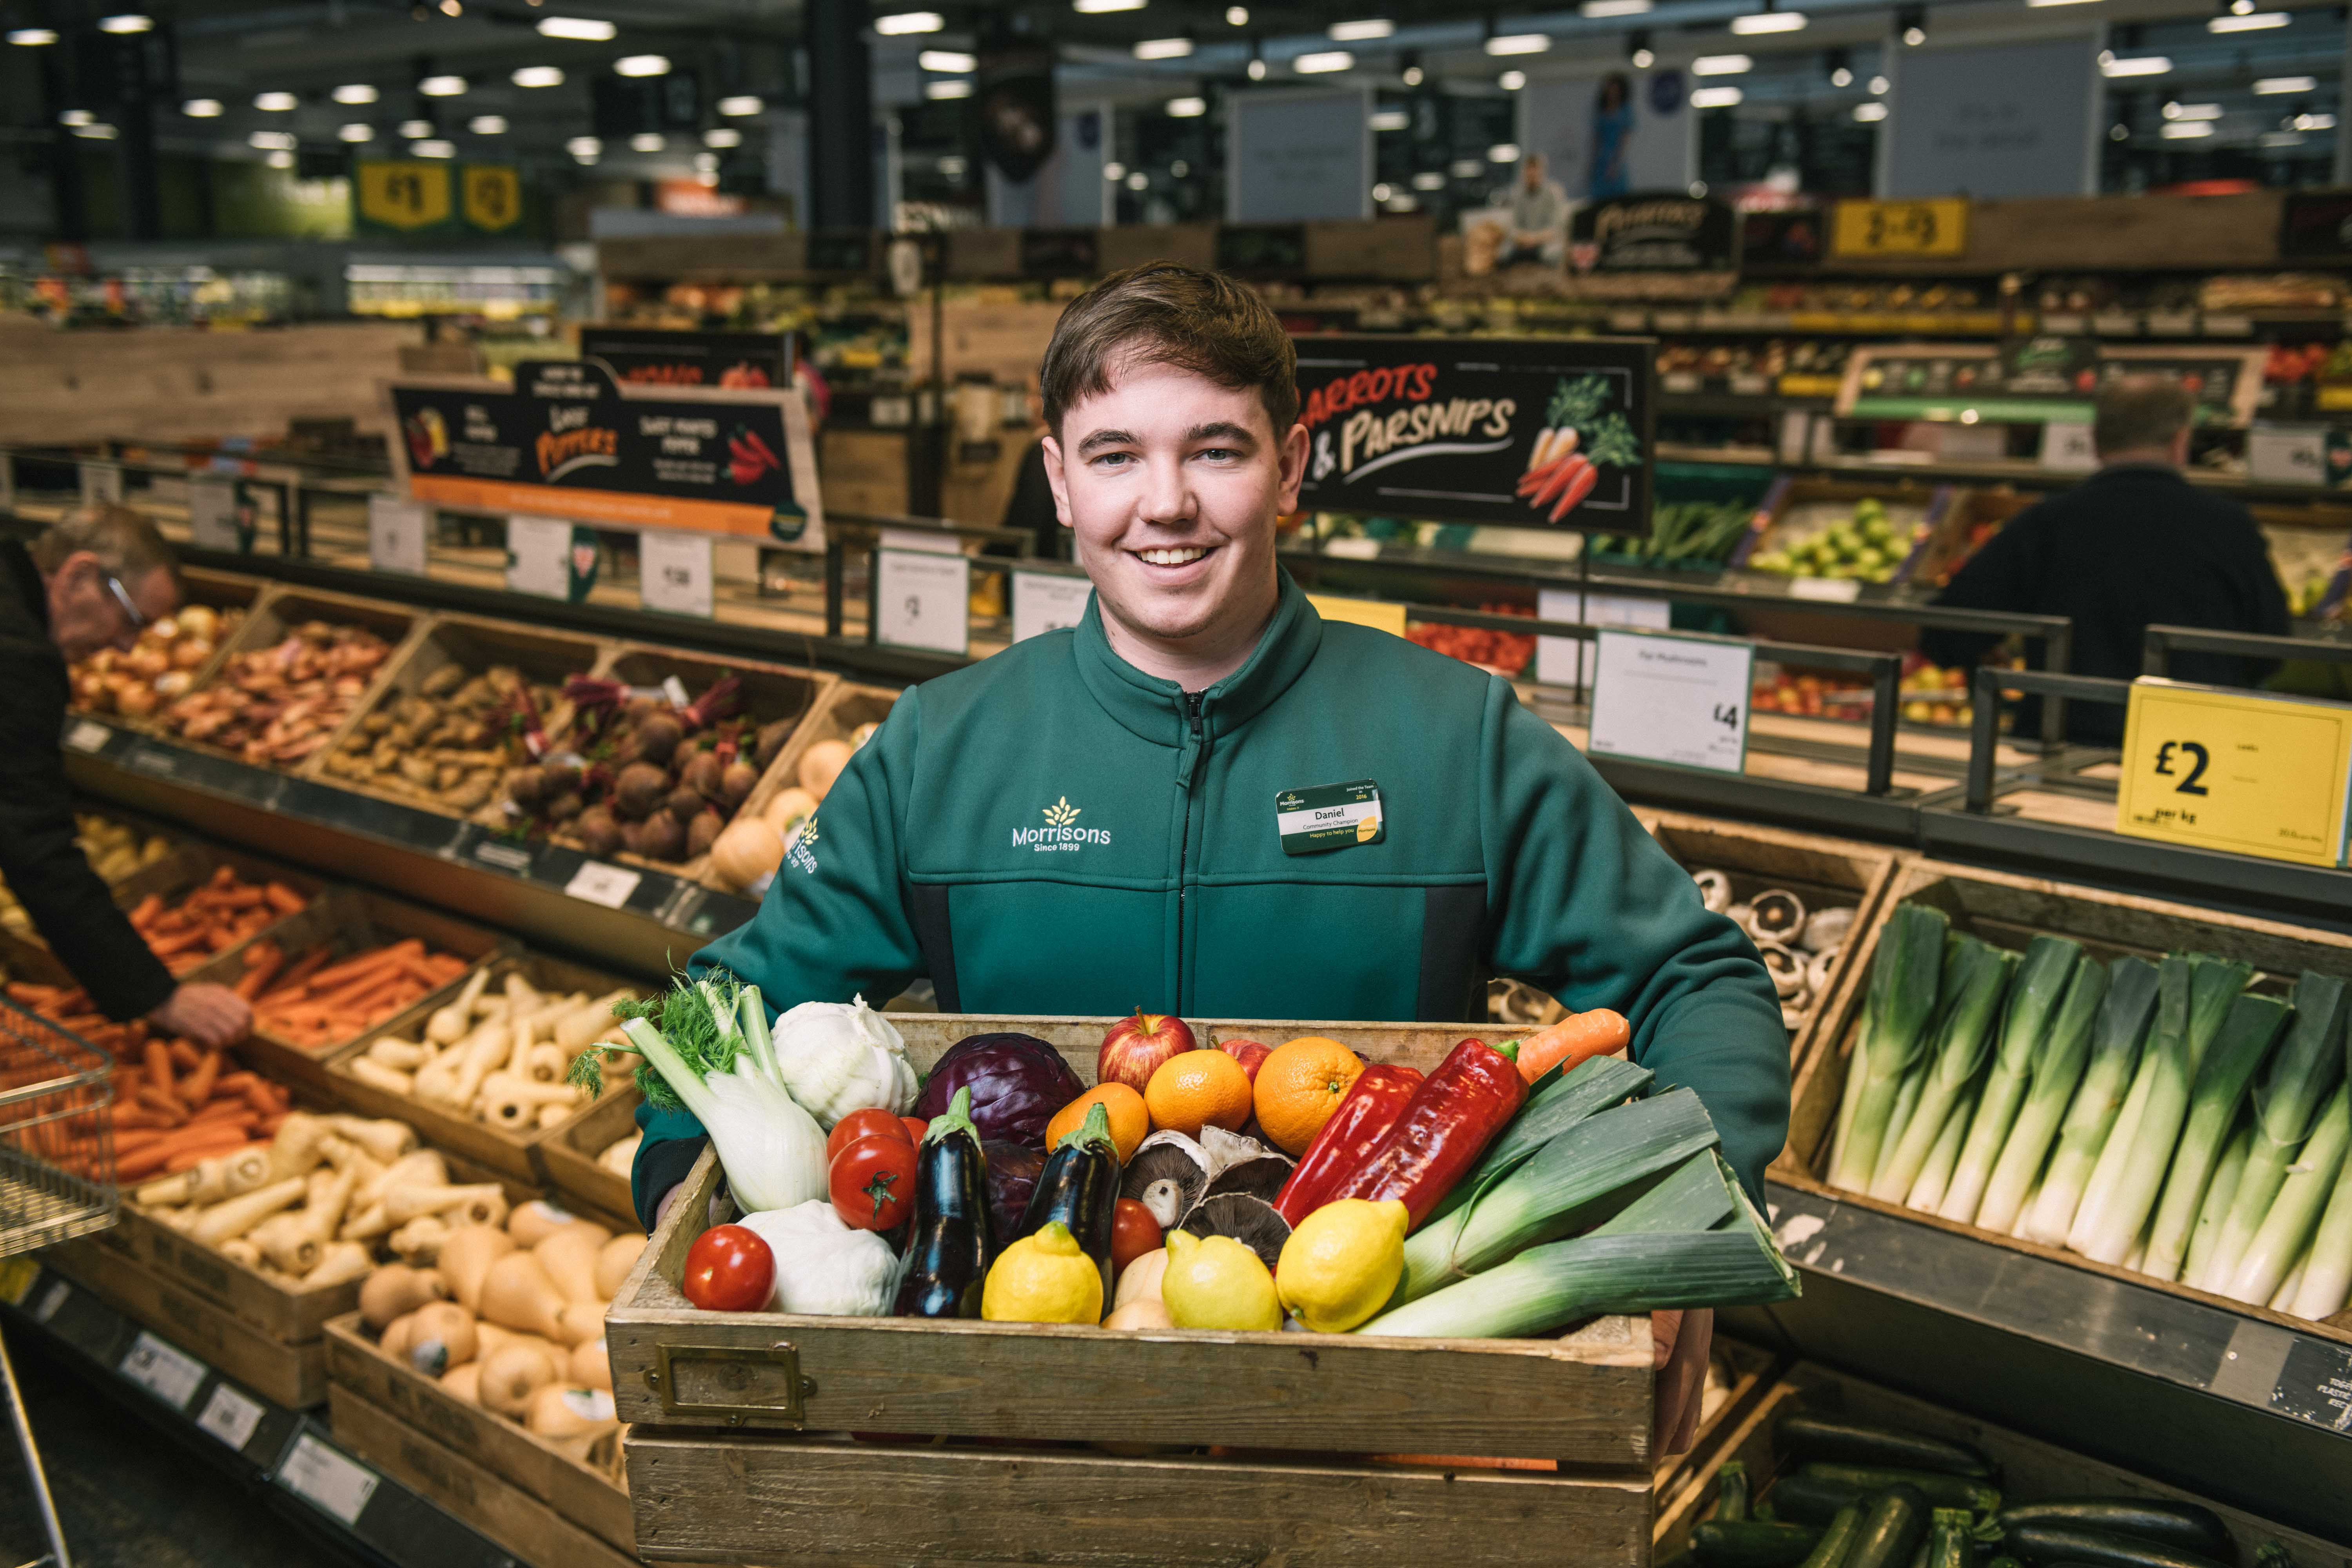 Morrisons pay to break £10 an hour barrier